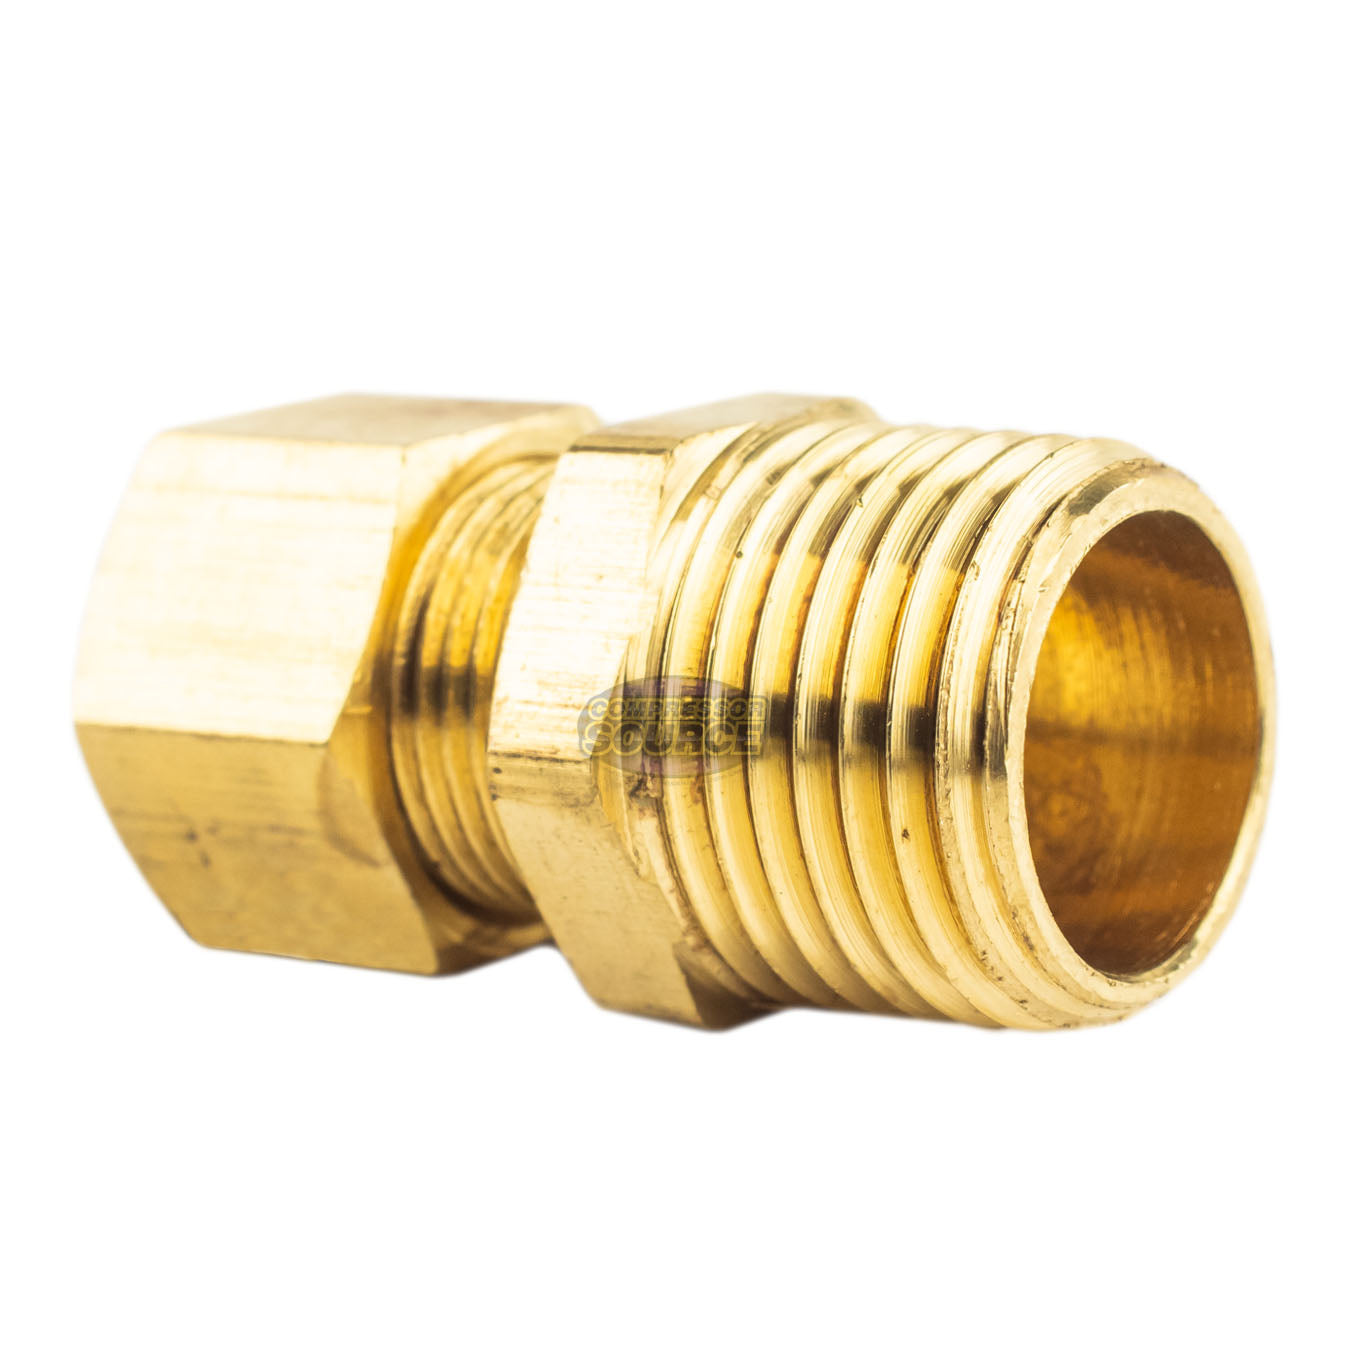 10 Pack 1/2 x 1/2 Male NPT Connector Brass Compression Fitting for 1/2 OD  Tube